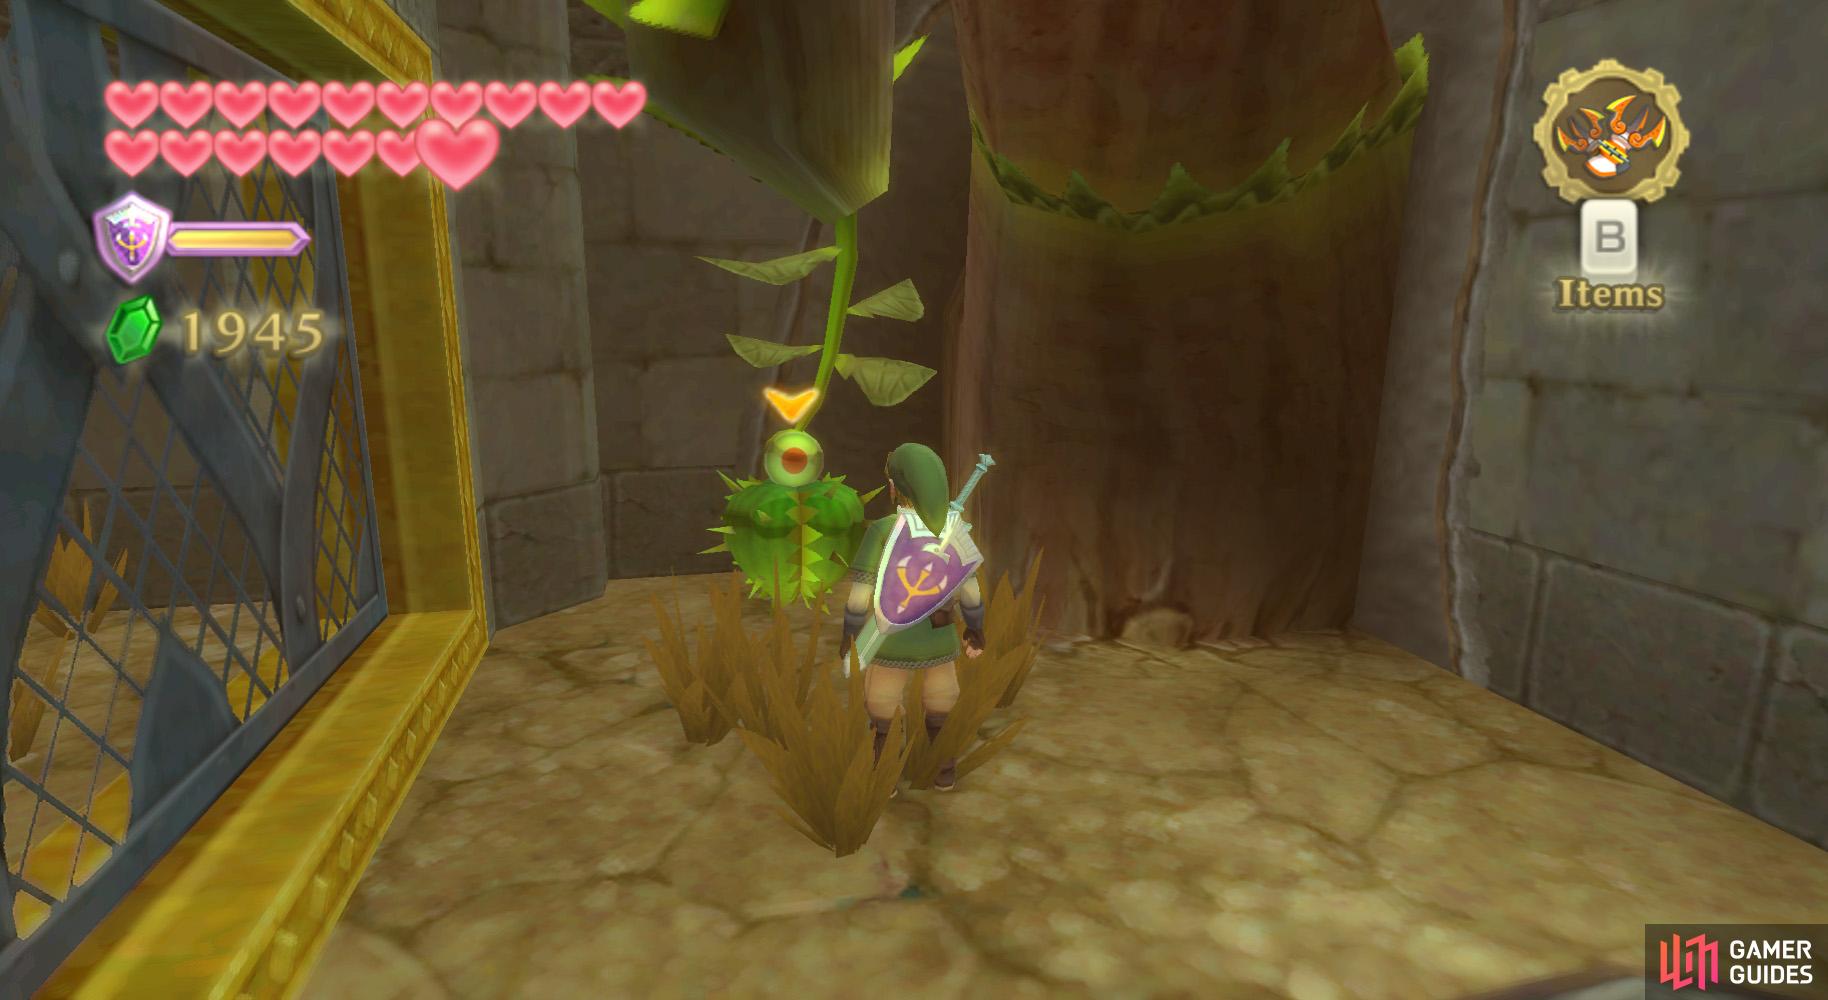 Push both underground switches, so you can reach this spiky plant.